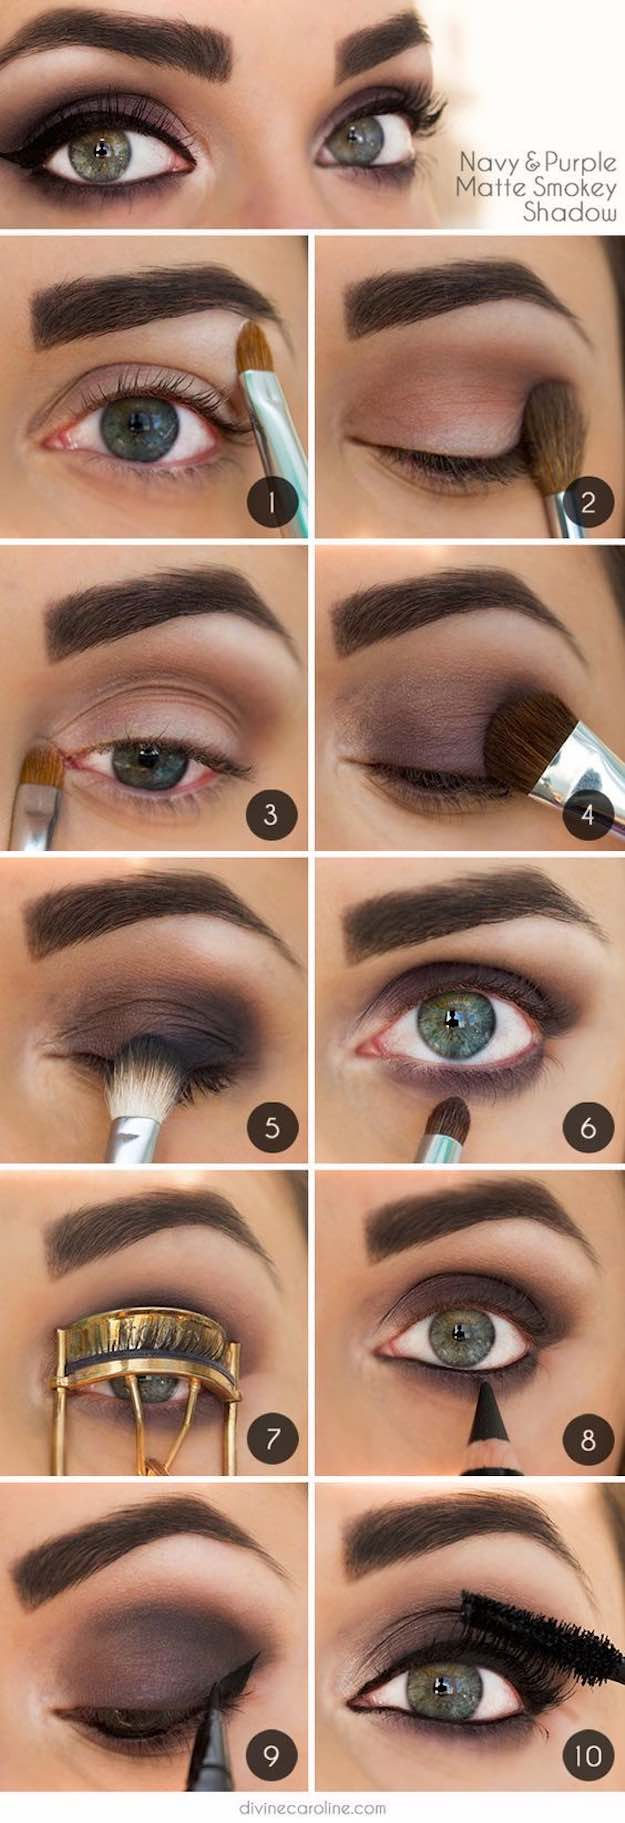 Easy Steps To Do Eye Makeup 50 Perfect Makeup Tutorials For Green Eyes The Goddess